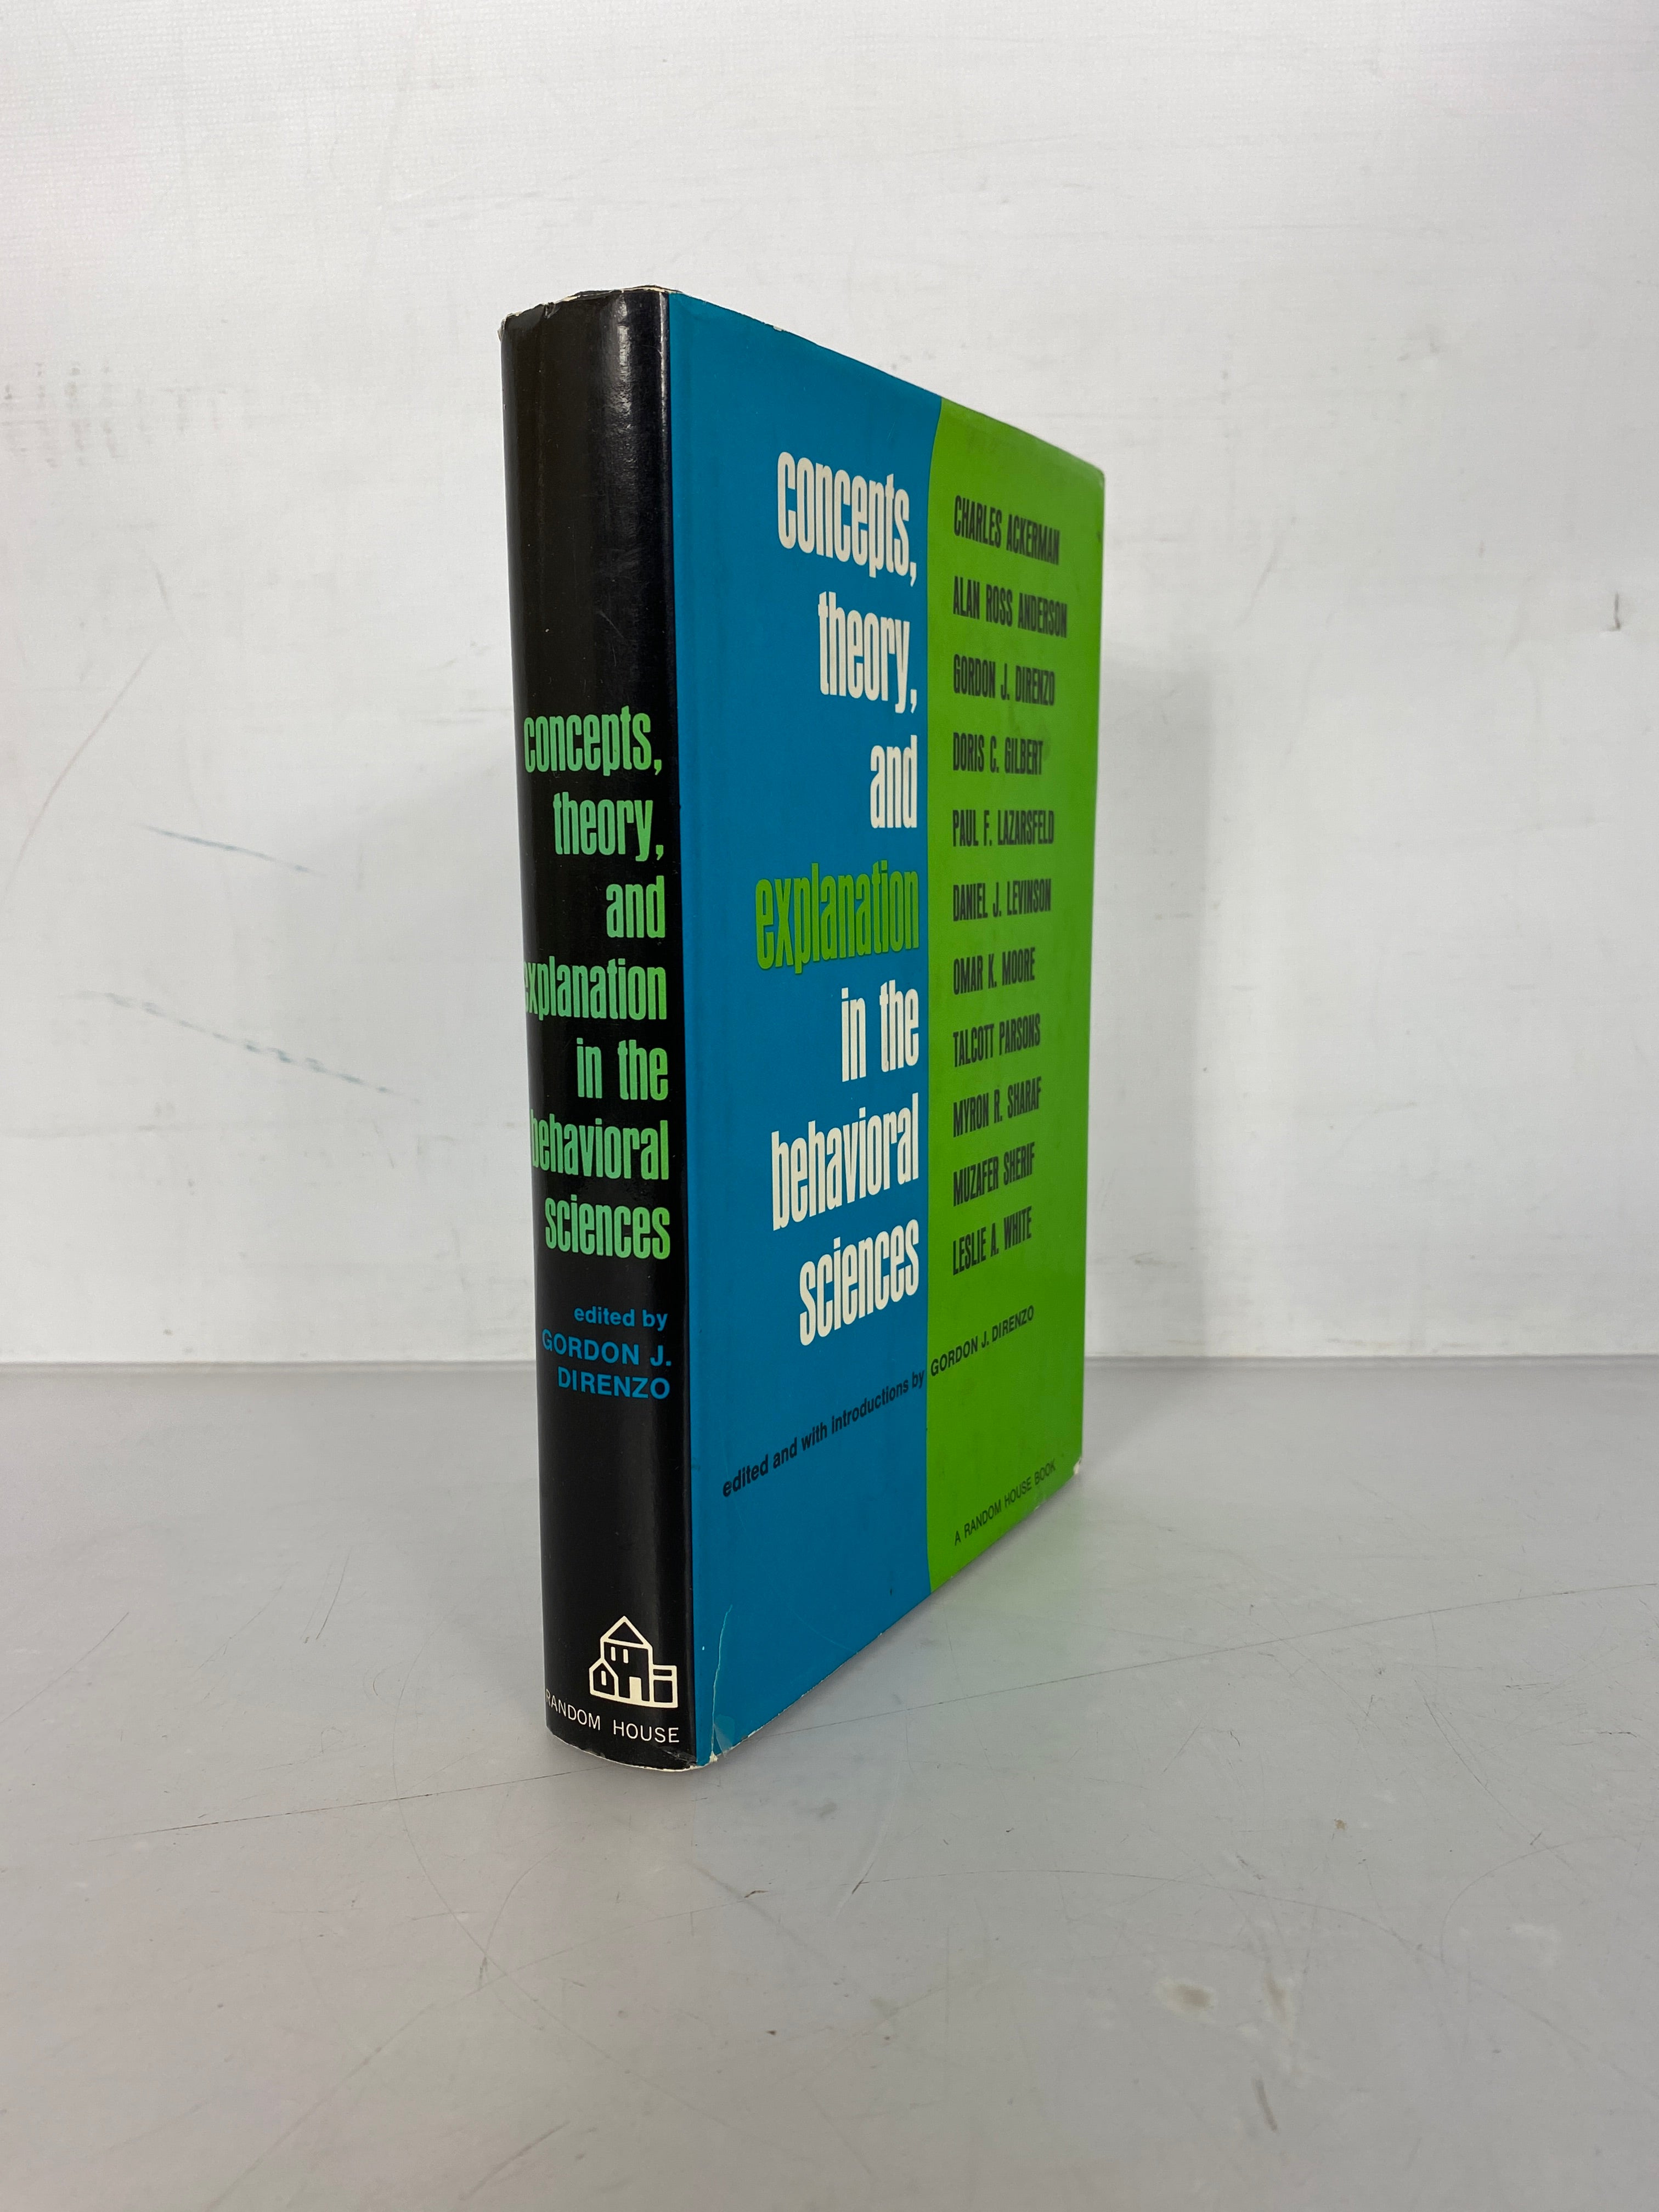 Concepts, Theory, and Explanation in the Behavioral Sciences by DiRenzo Second Printing 1967 HC DJ